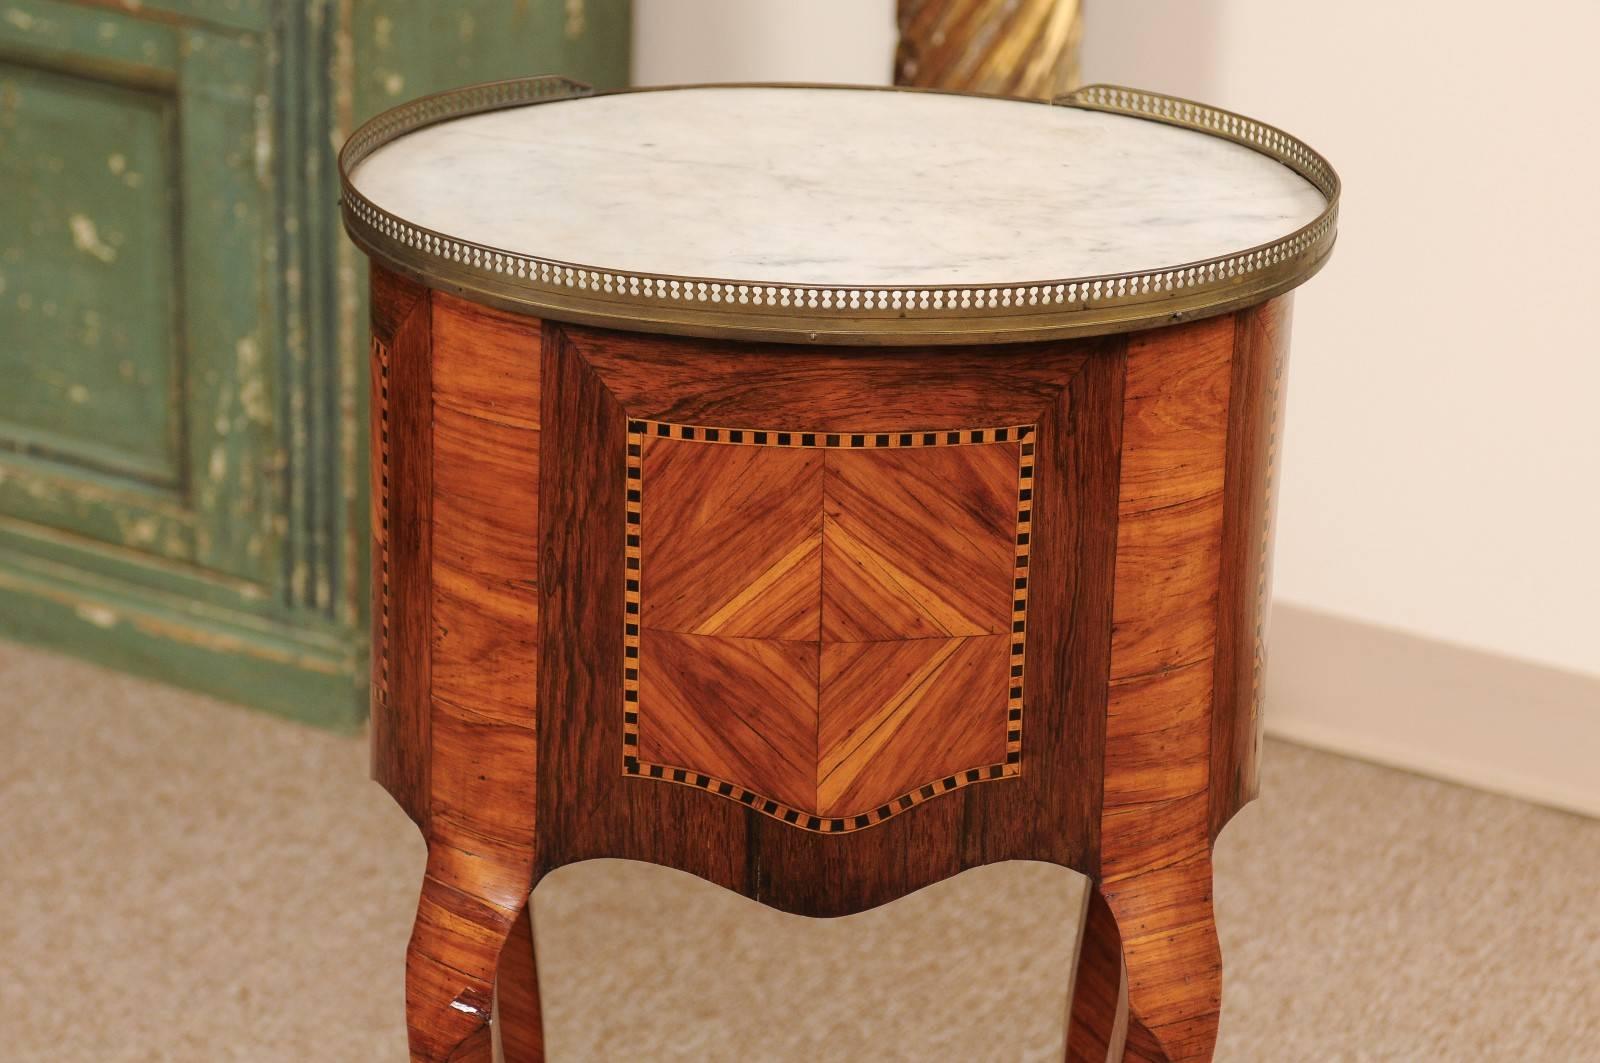 19th Century French Inlaid Tulipwood Chevet with Oval White Marble Top For Sale 4